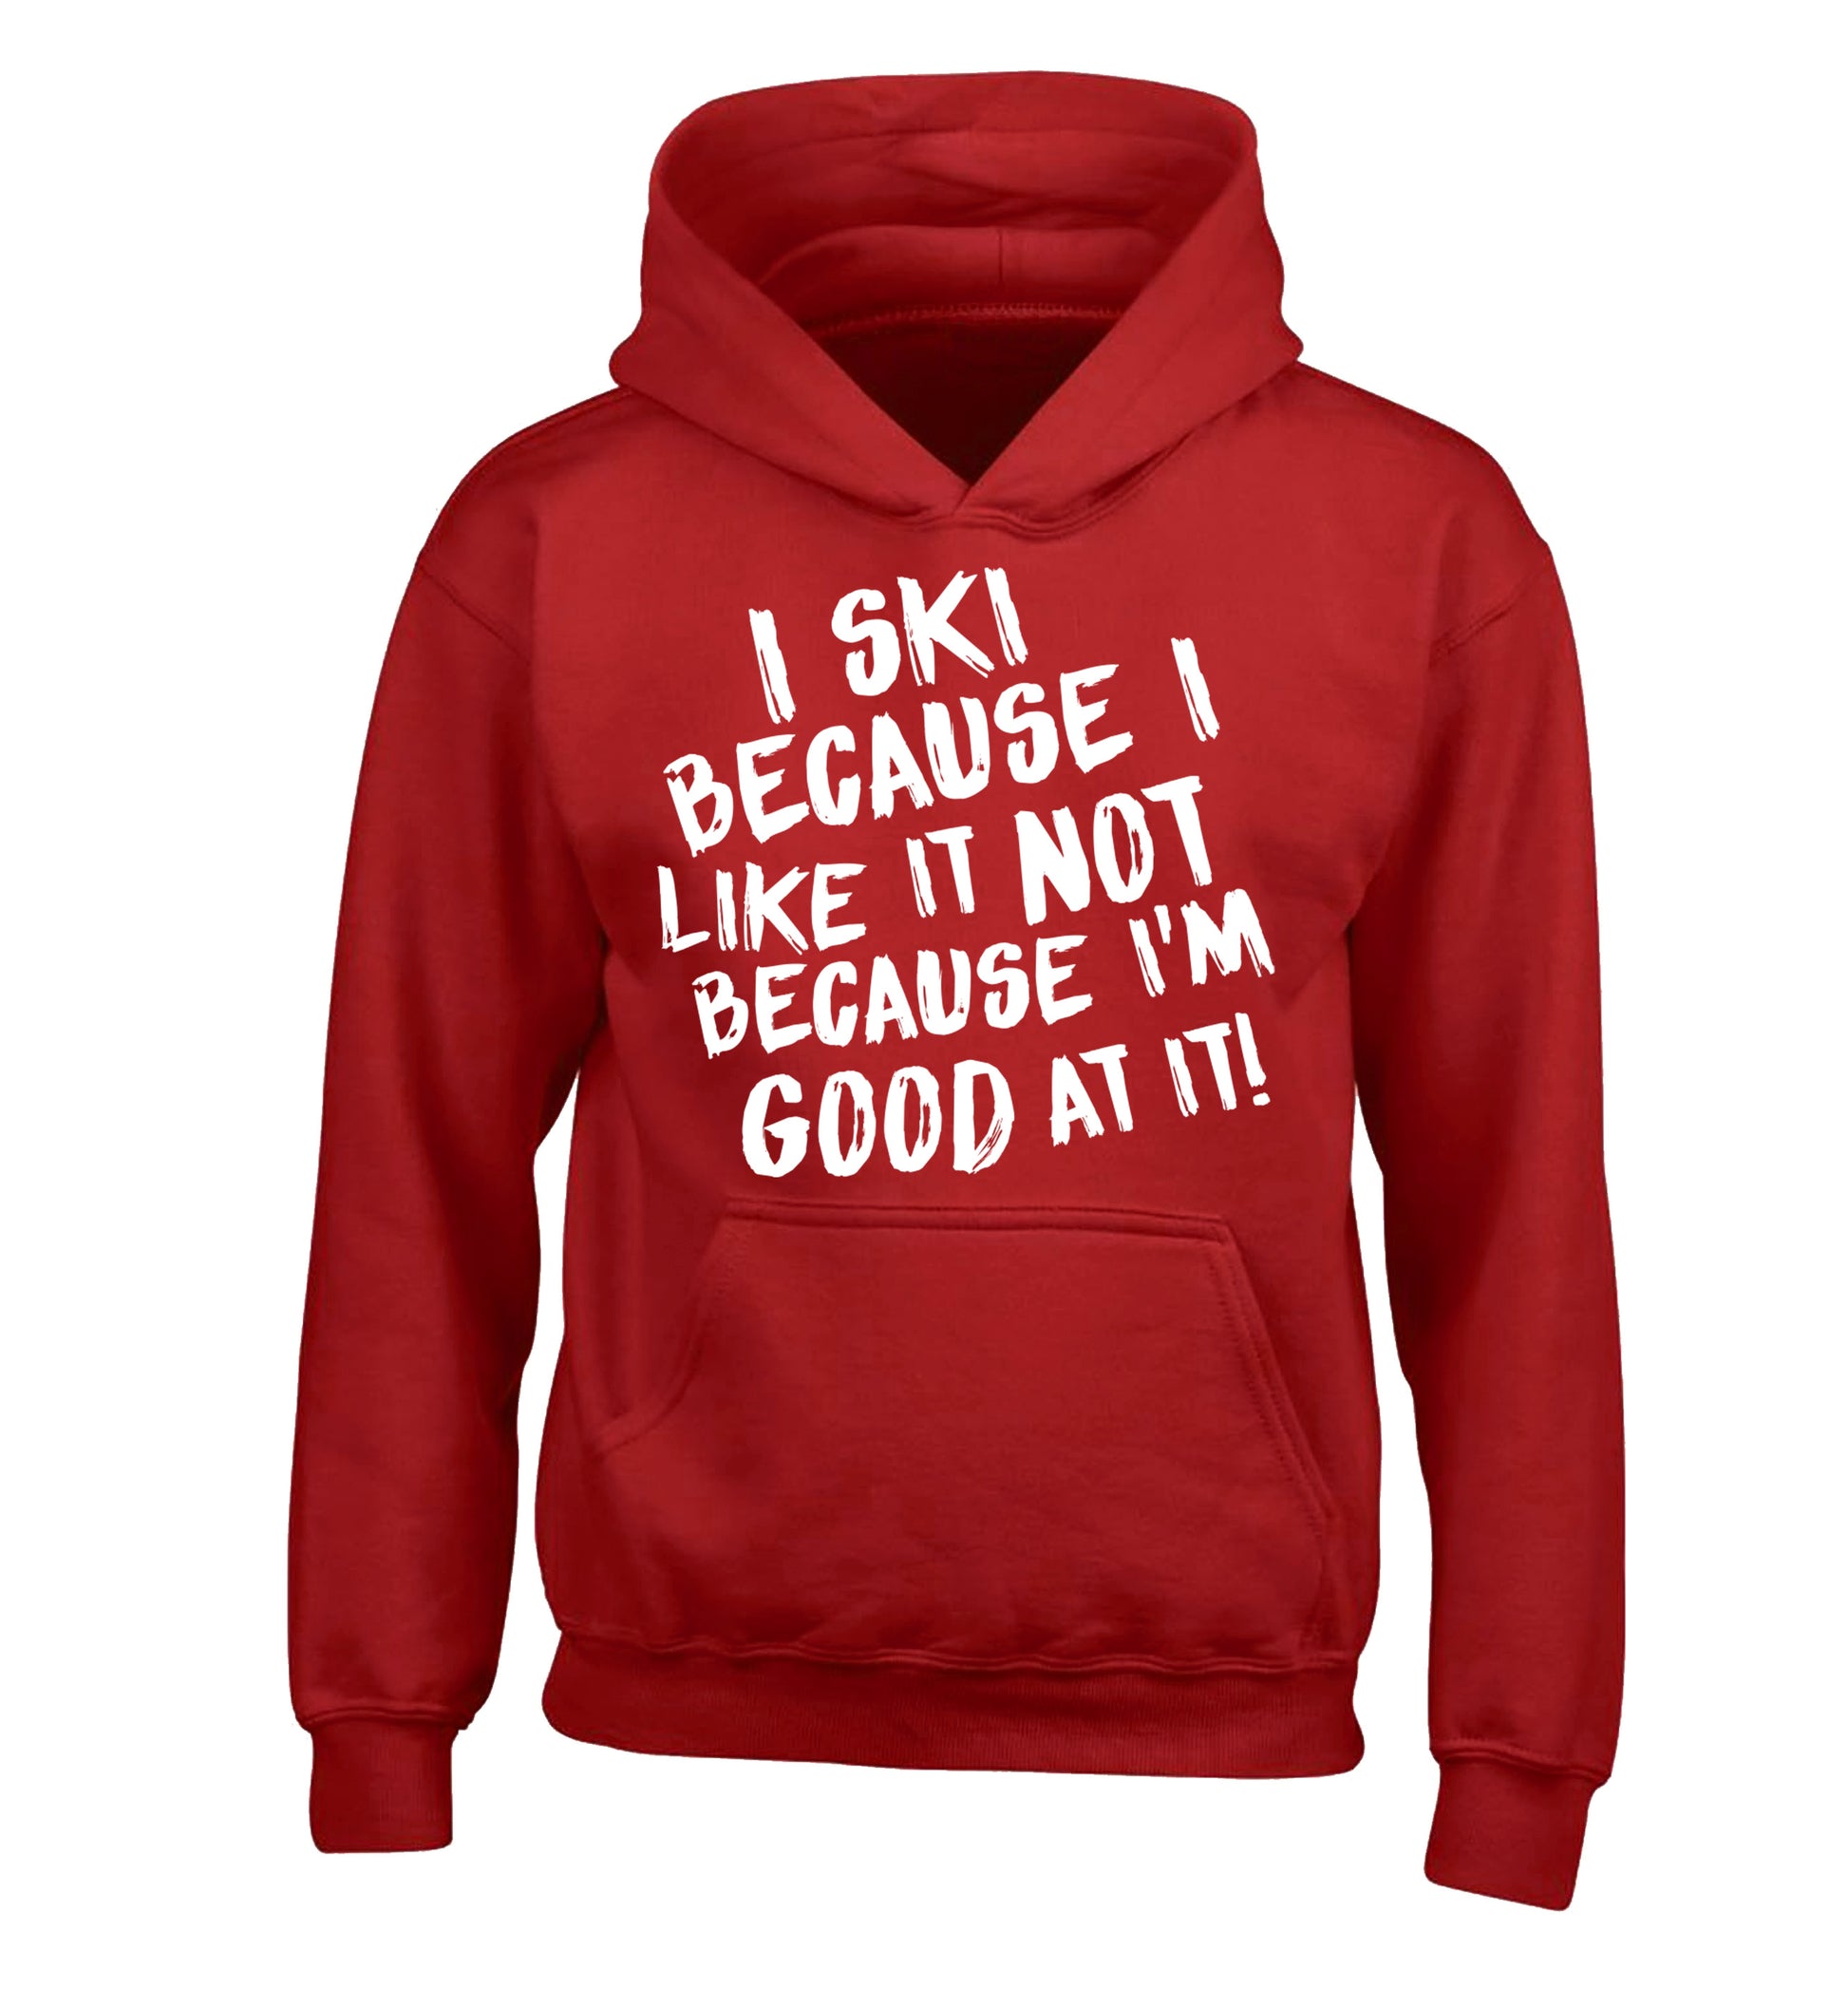 I ski because I like it not because I'm good at it children's red hoodie 12-14 Years